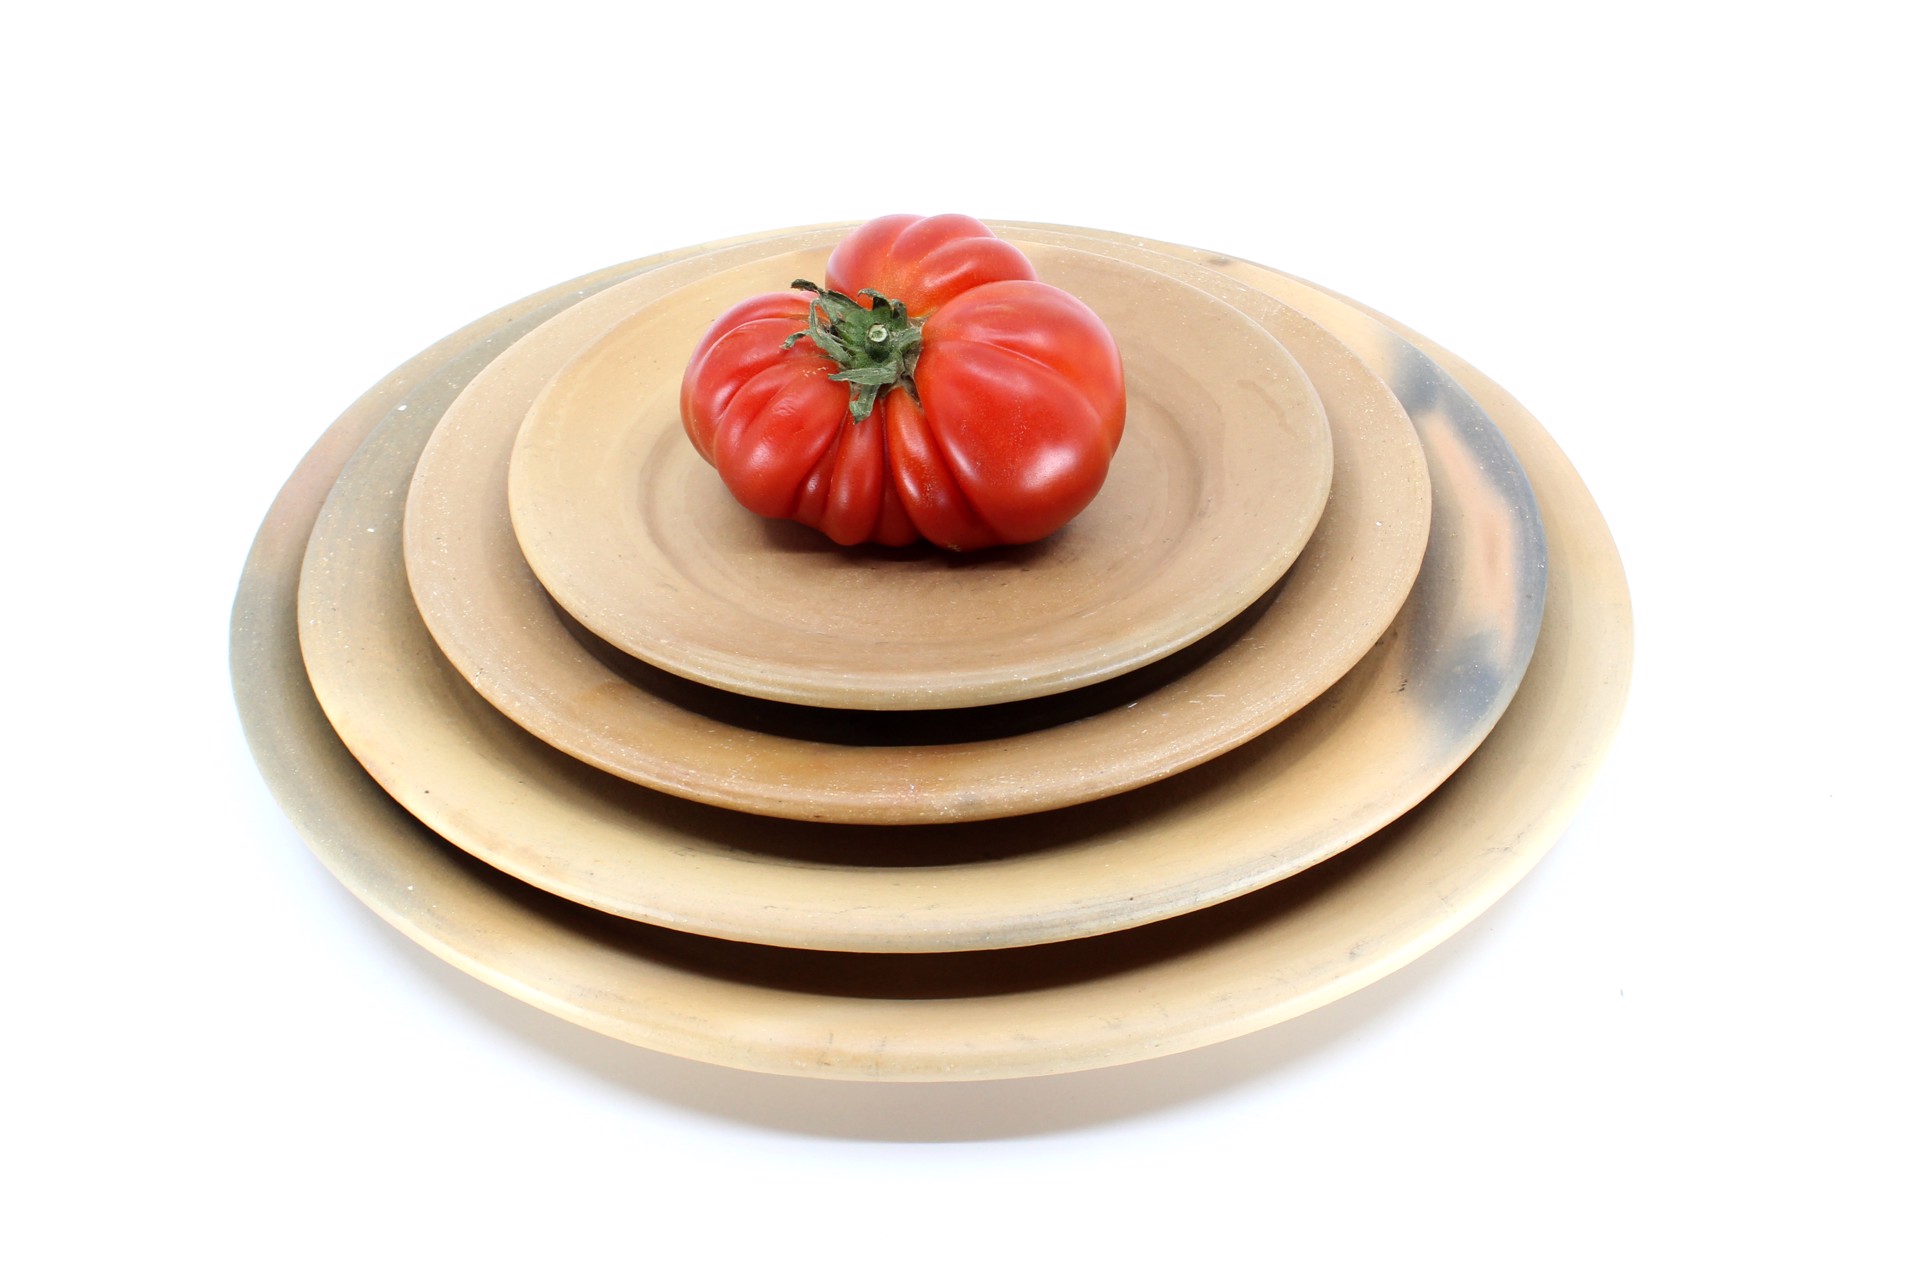 Valeria Dinner Plate by Colectivo 1050°